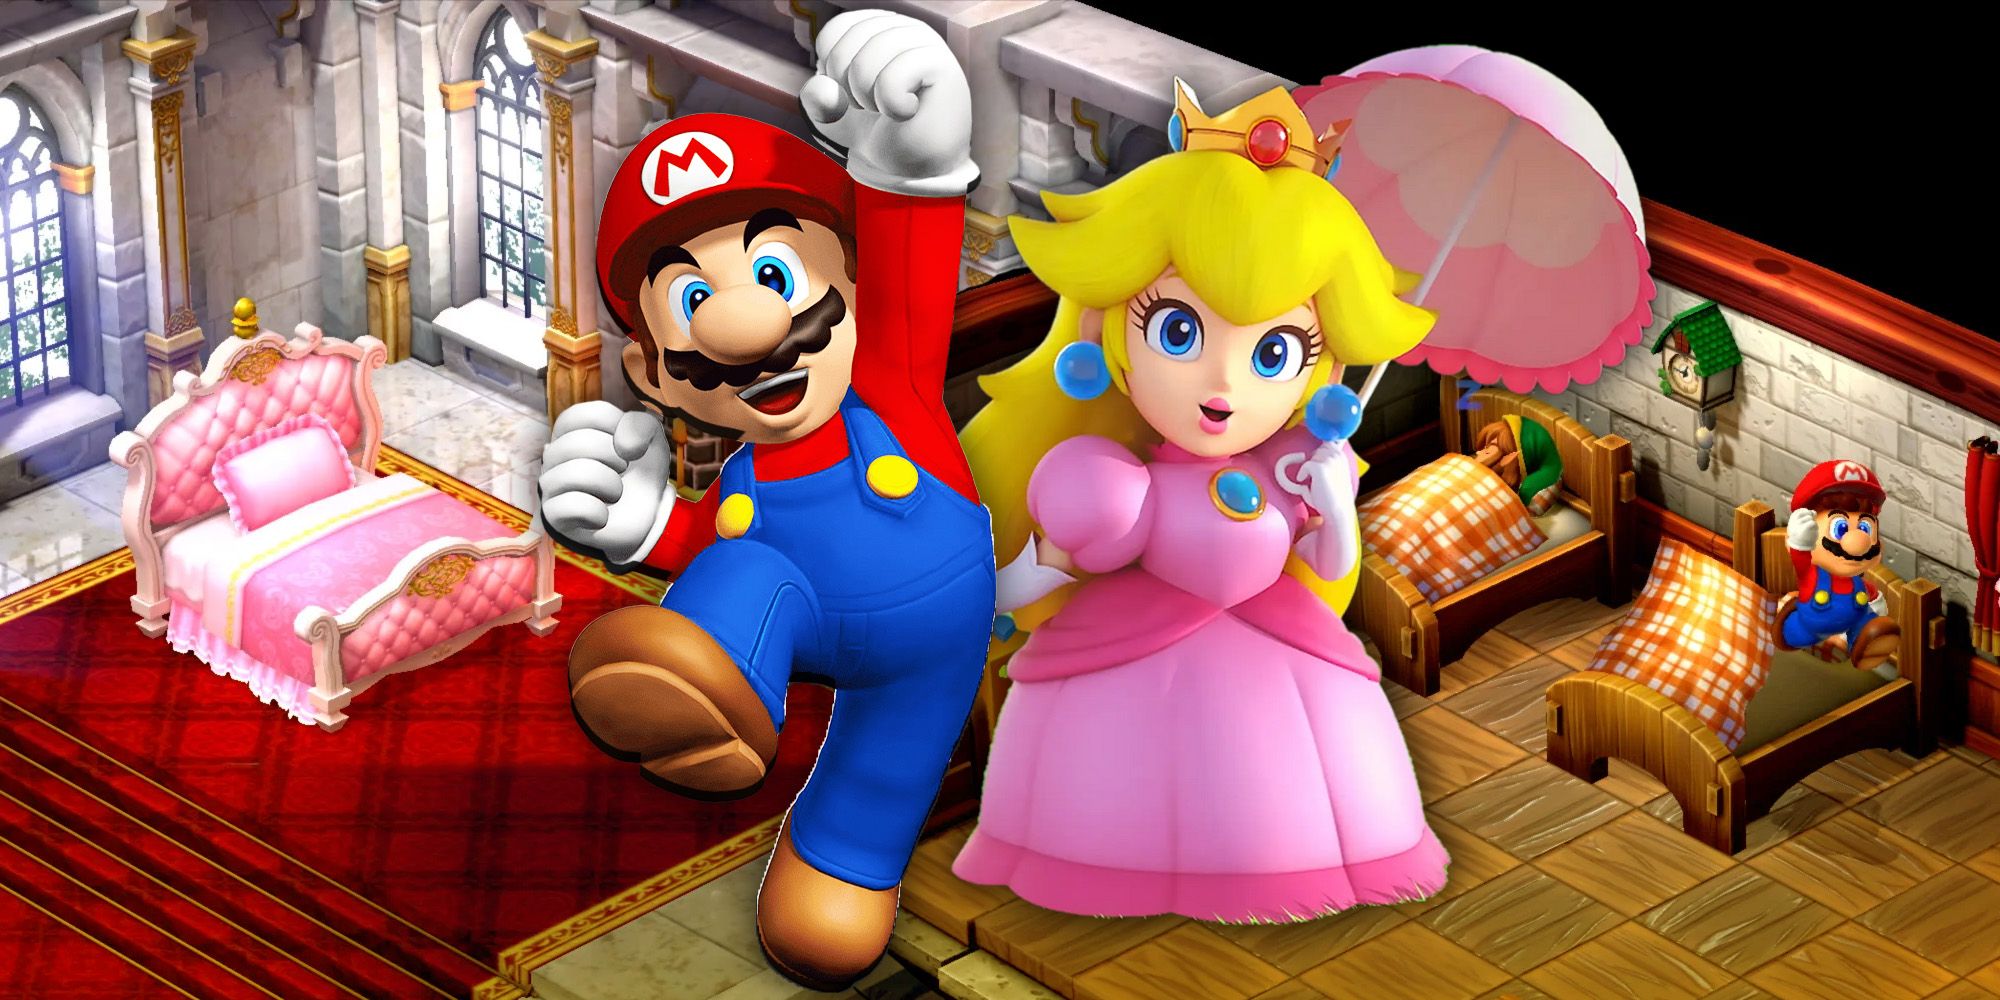 Mario and Princess Peach from Super Mario RPG with some of the game's secrets in the background.